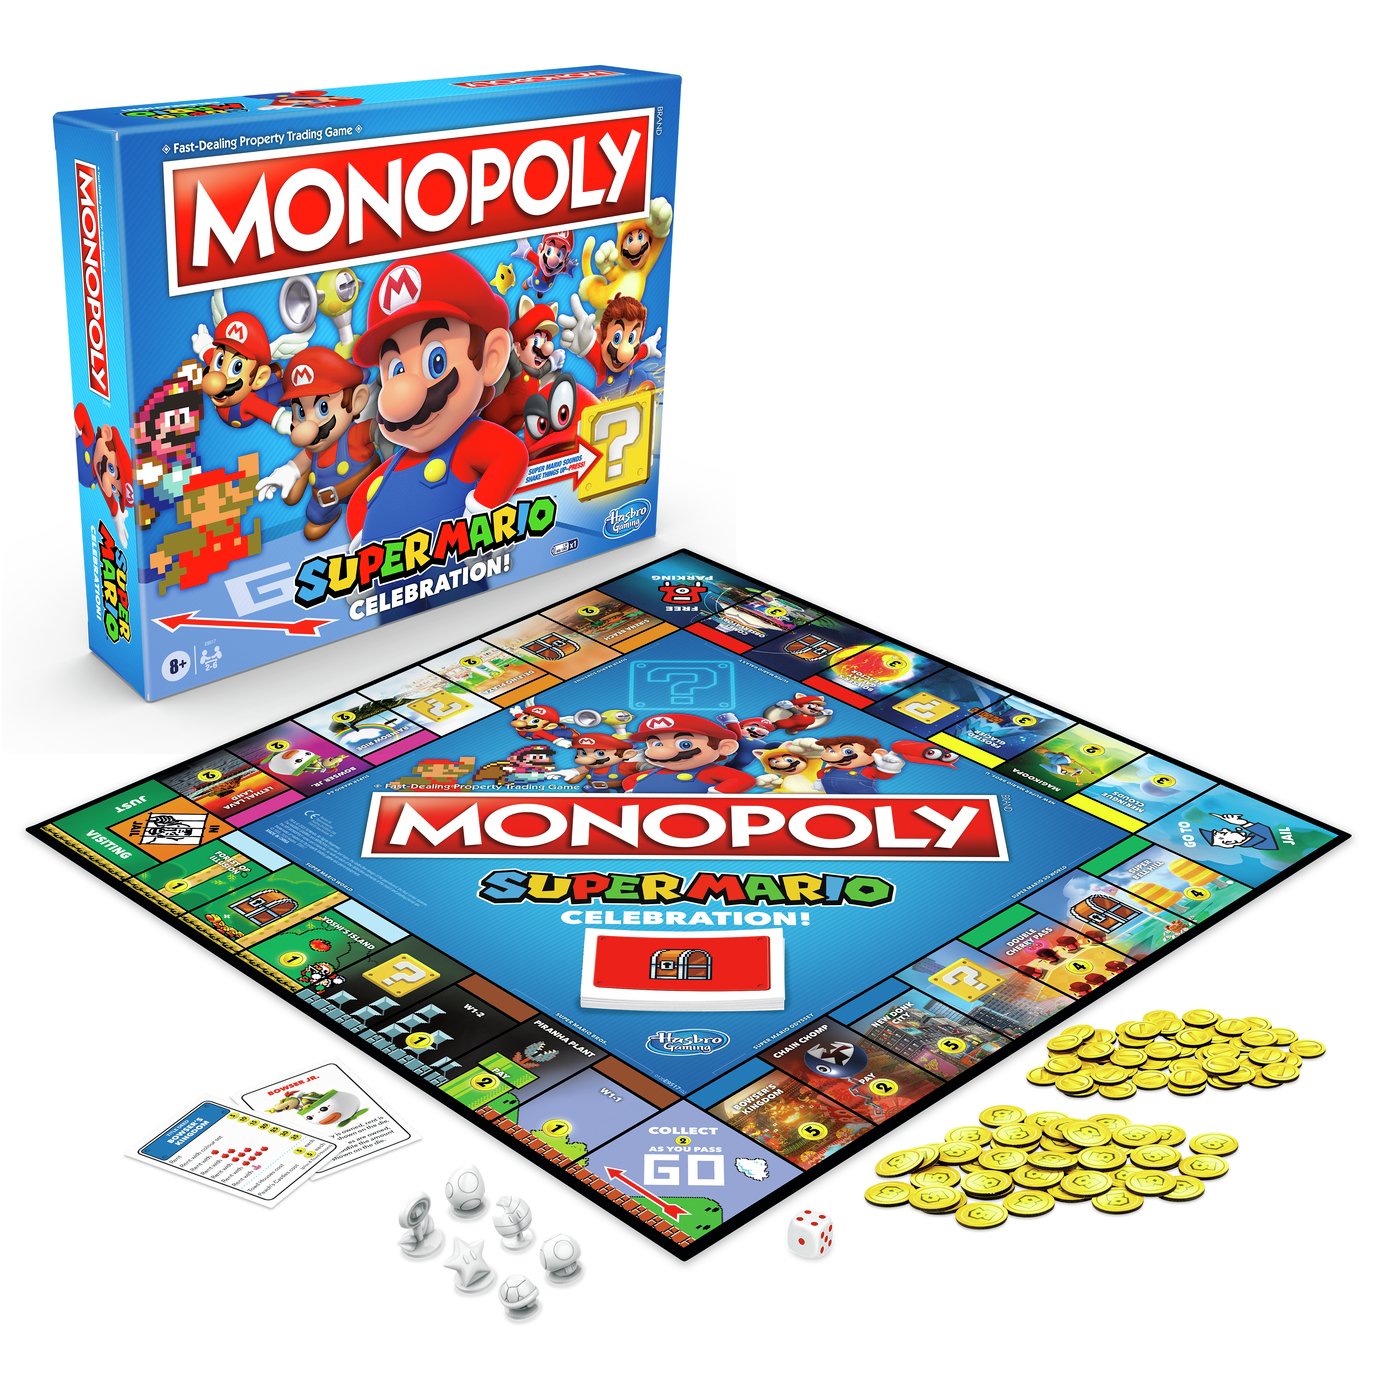 Monopoly Super Mario Celebration from Hasbro Gaming Review